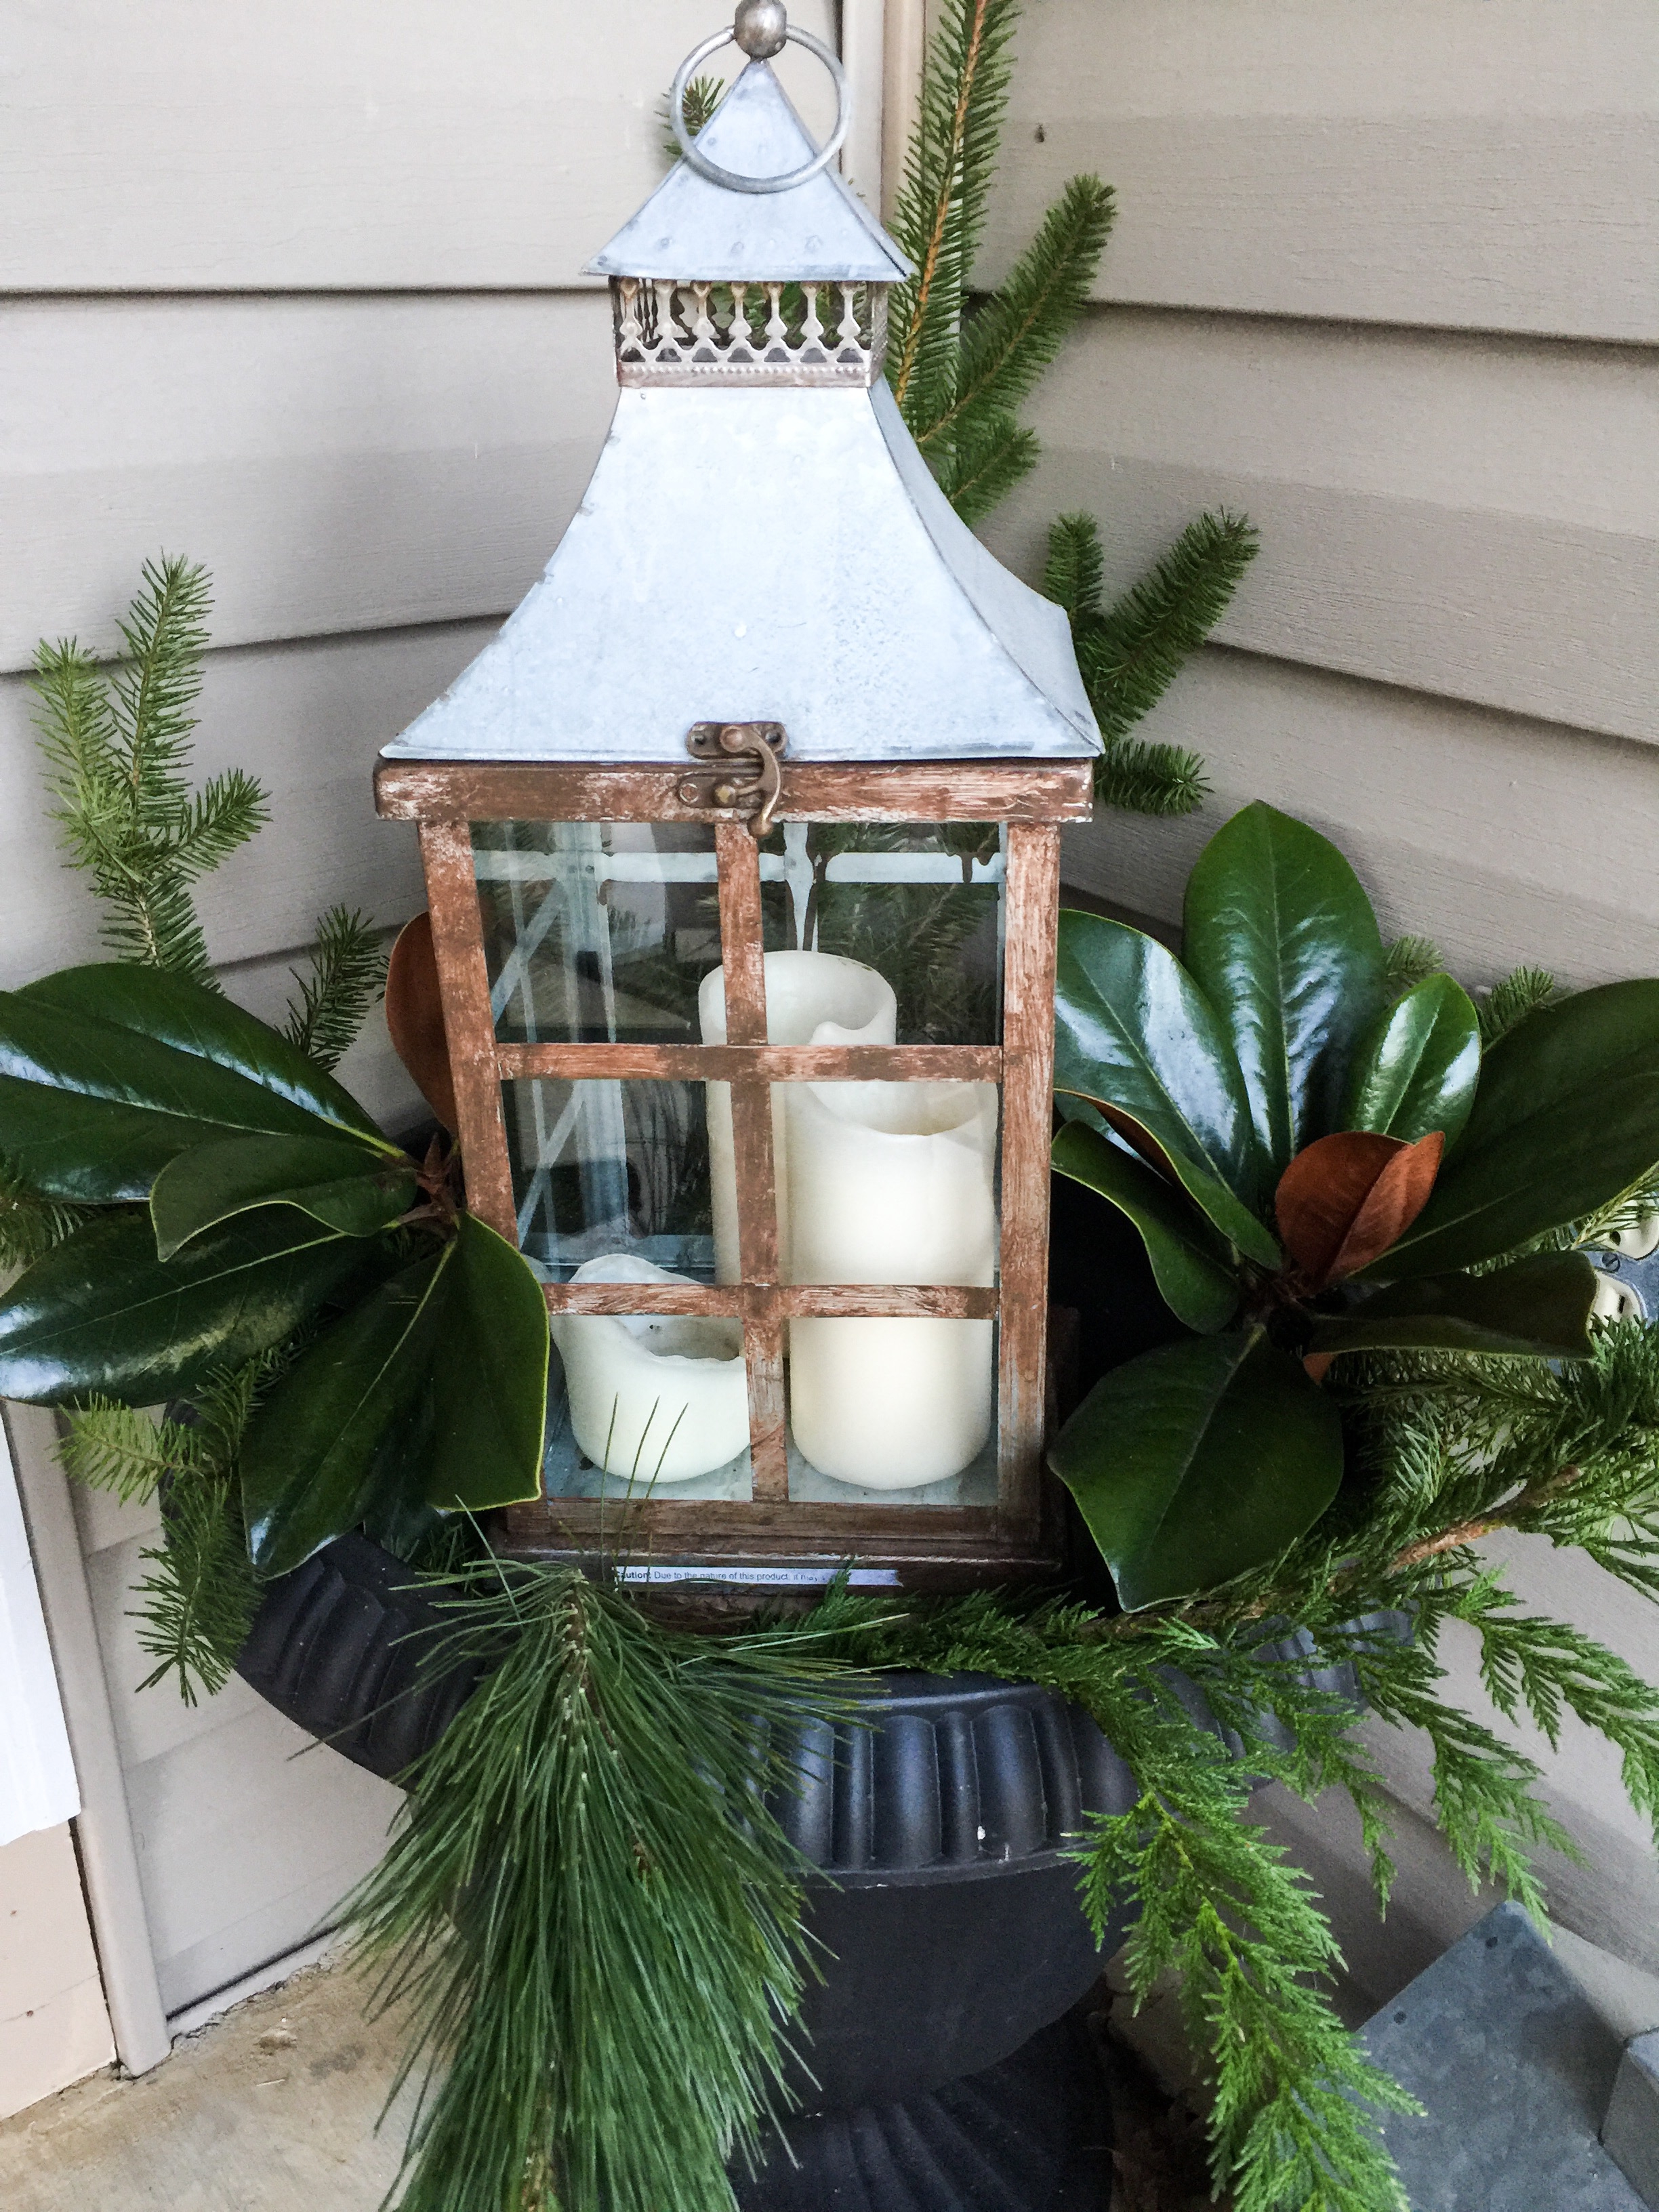 Magnolia & Galvanized Metal:  Our Christmas Front Porch